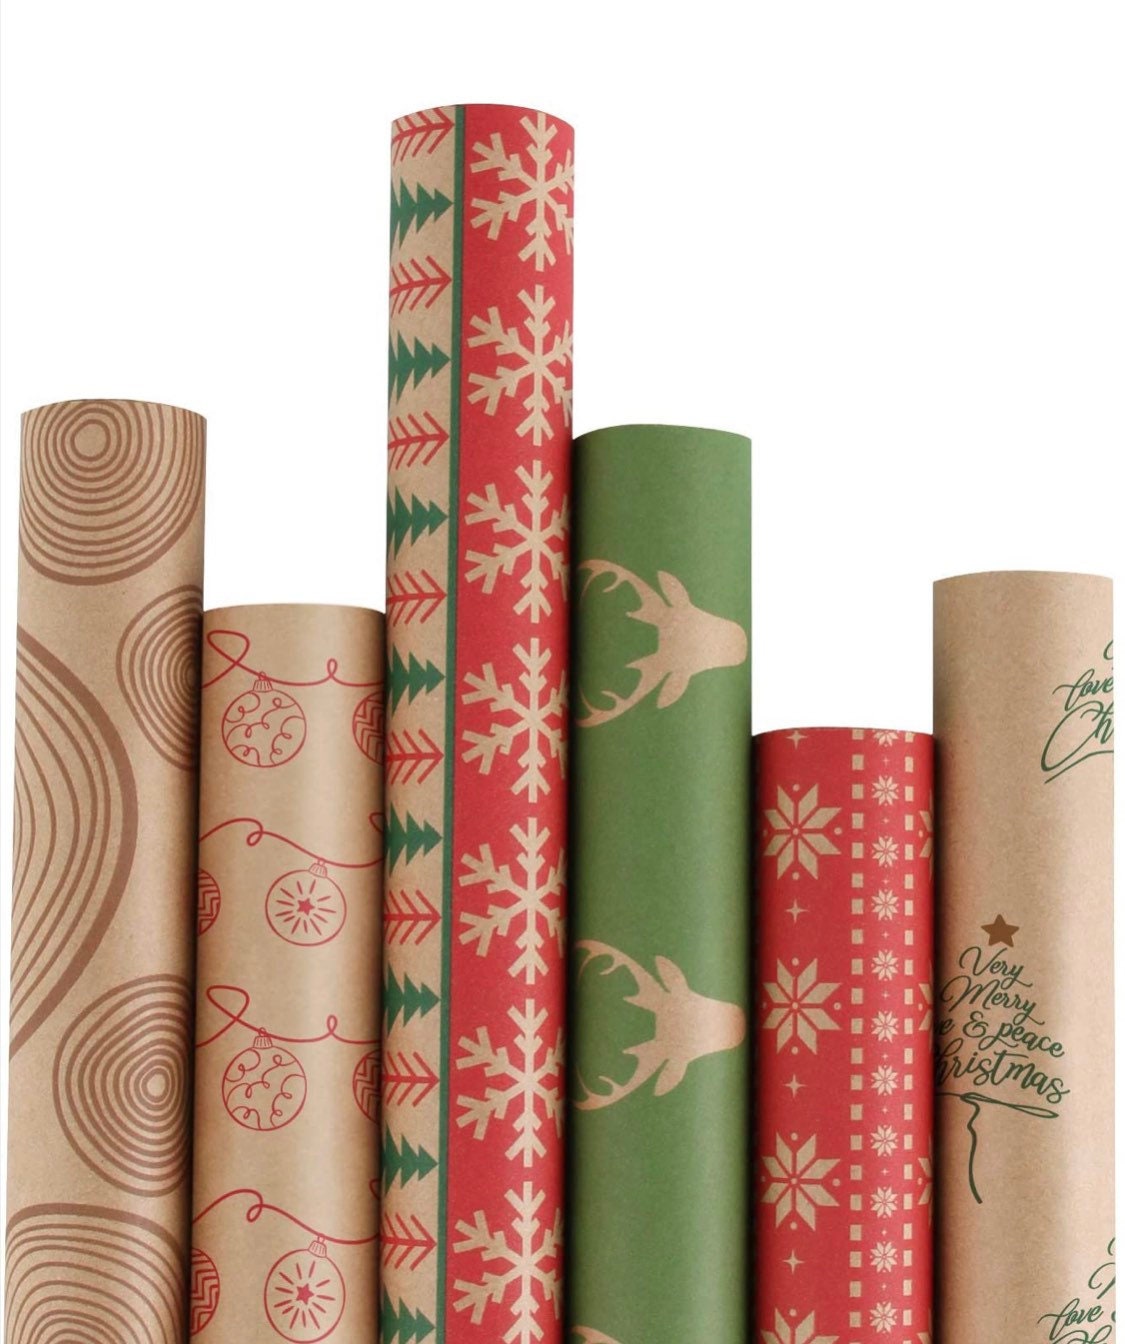 Wrapping paper set - 6ct Brown paper gift wrap - Eco friendly sustainable recyclable Kraft paper for Christmas gifts